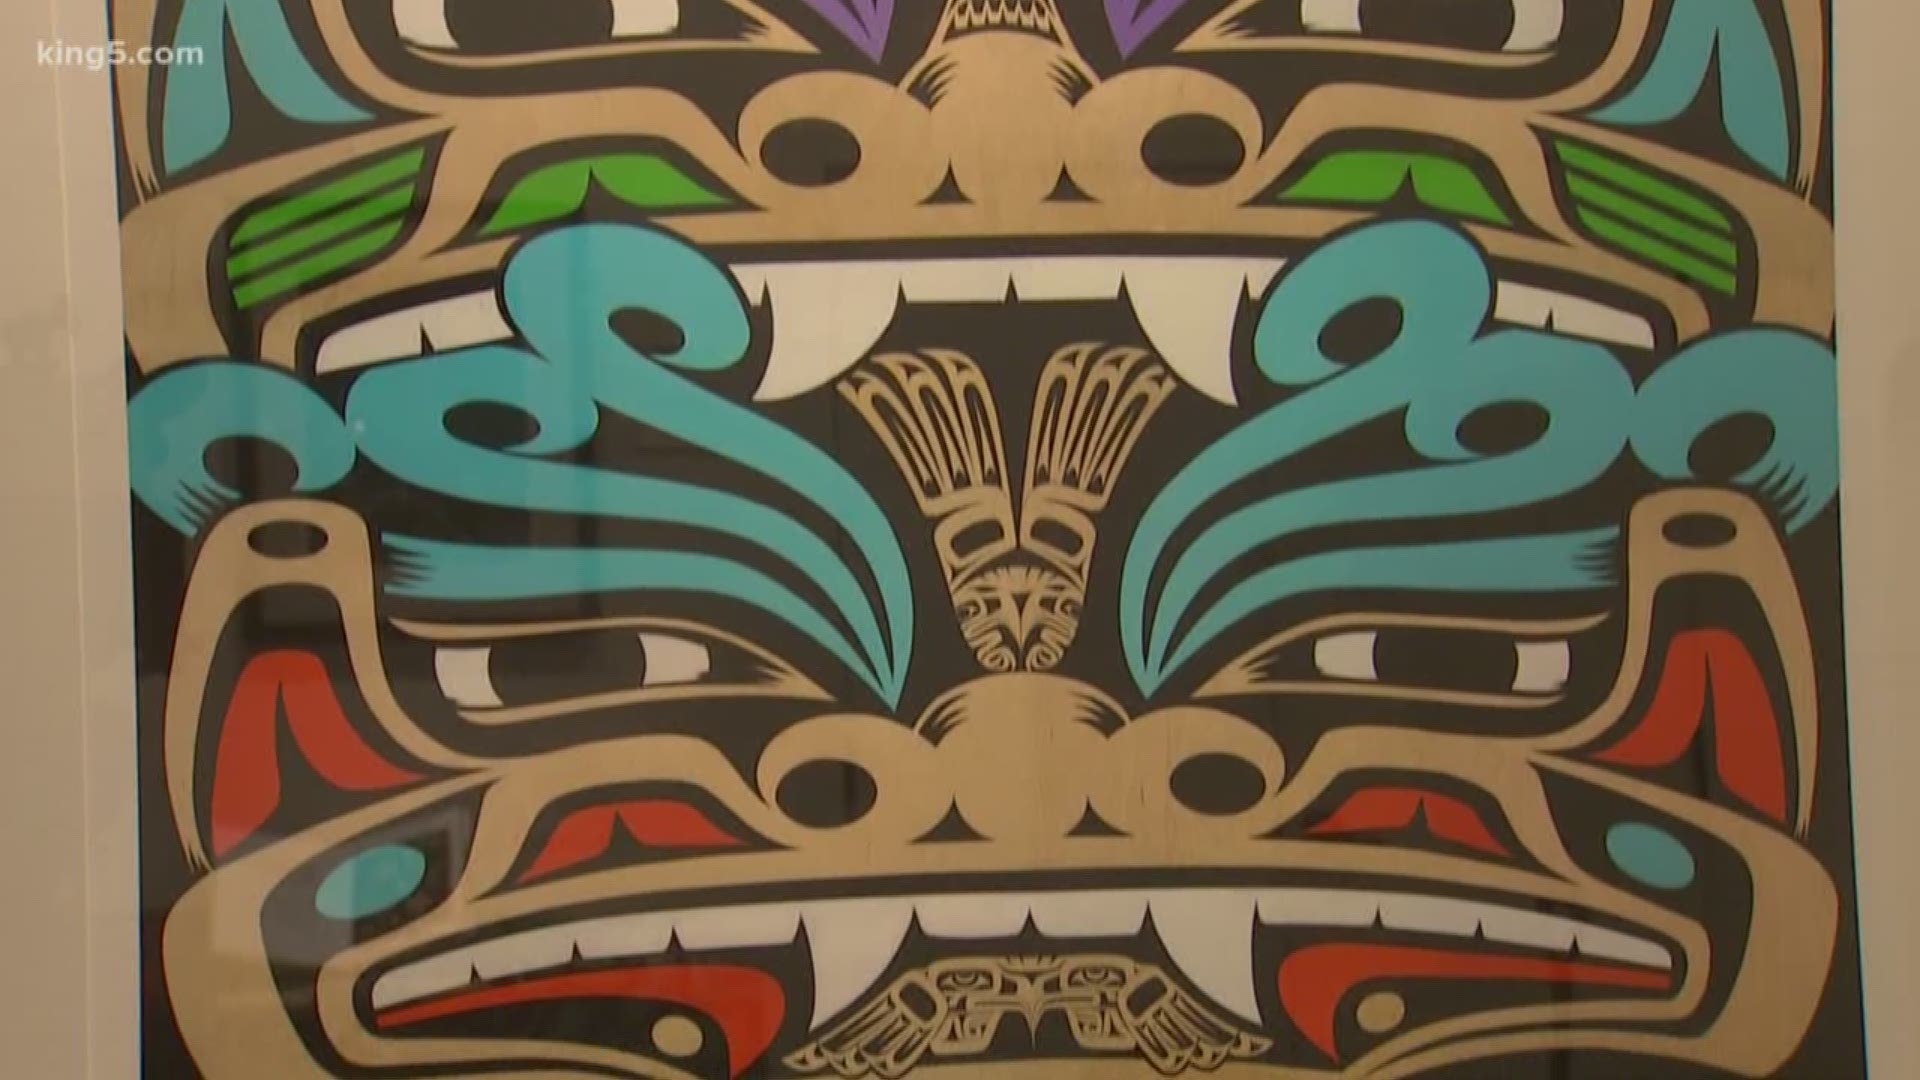 While the name of Seattle’s NHL team is unknown, there is buzz that the logo will have ties to the area’s indigenous roots.